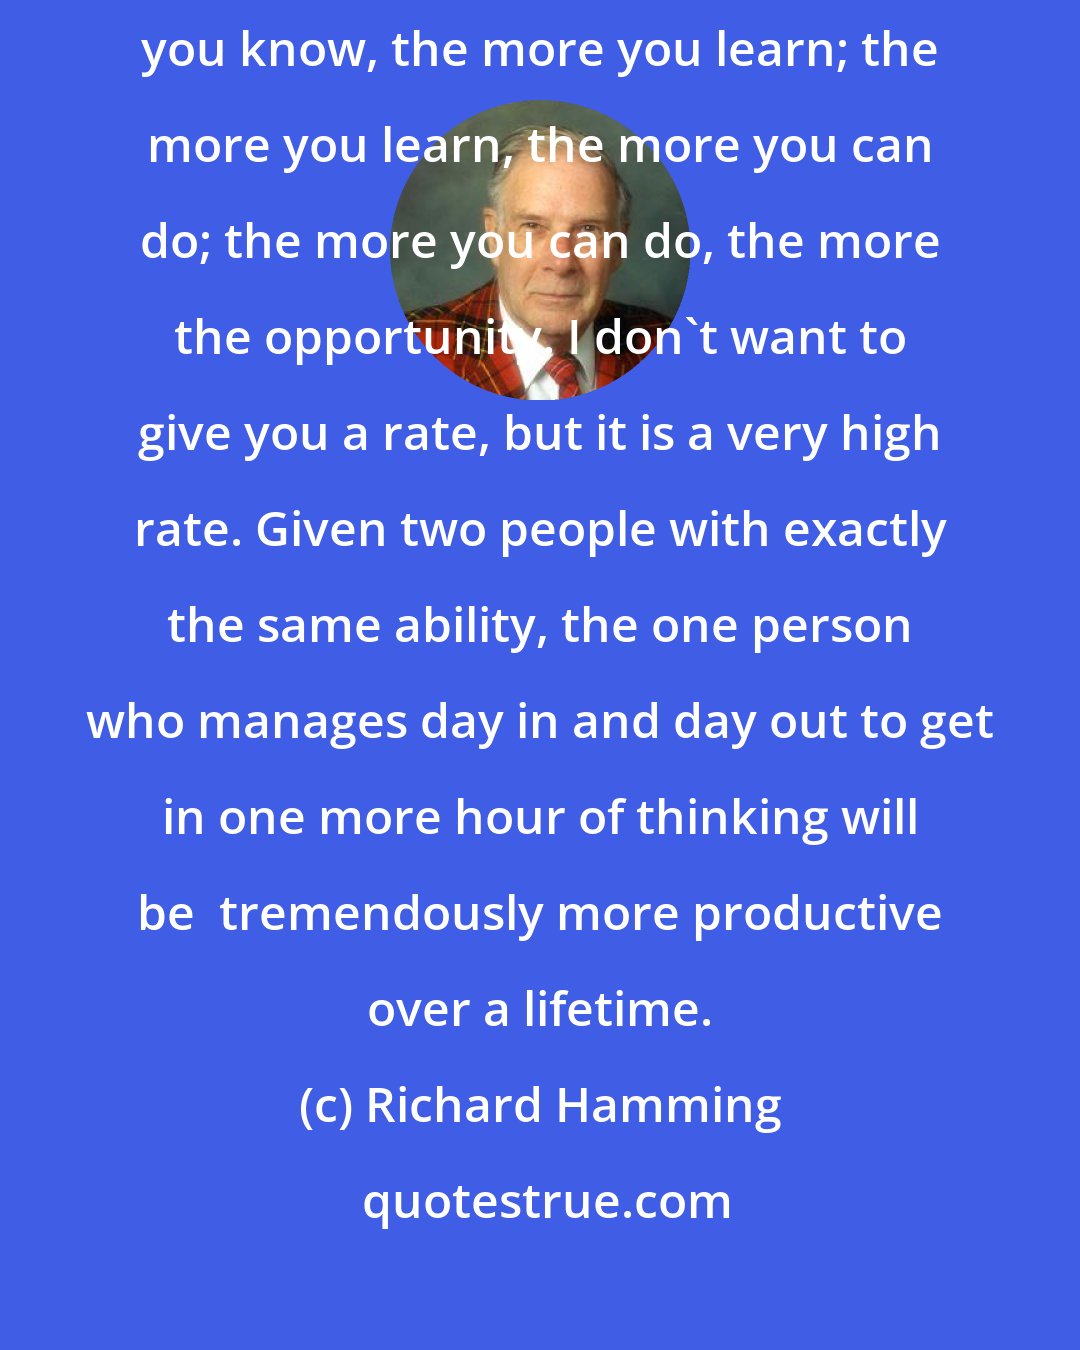 Richard Hamming: Knowledge and productivity are like compound interest. The more you know, the more you learn; the more you learn, the more you can do; the more you can do, the more the opportunity. I don`t want to give you a rate, but it is a very high rate. Given two people with exactly the same ability, the one person who manages day in and day out to get in one more hour of thinking will be  tremendously more productive over a lifetime.